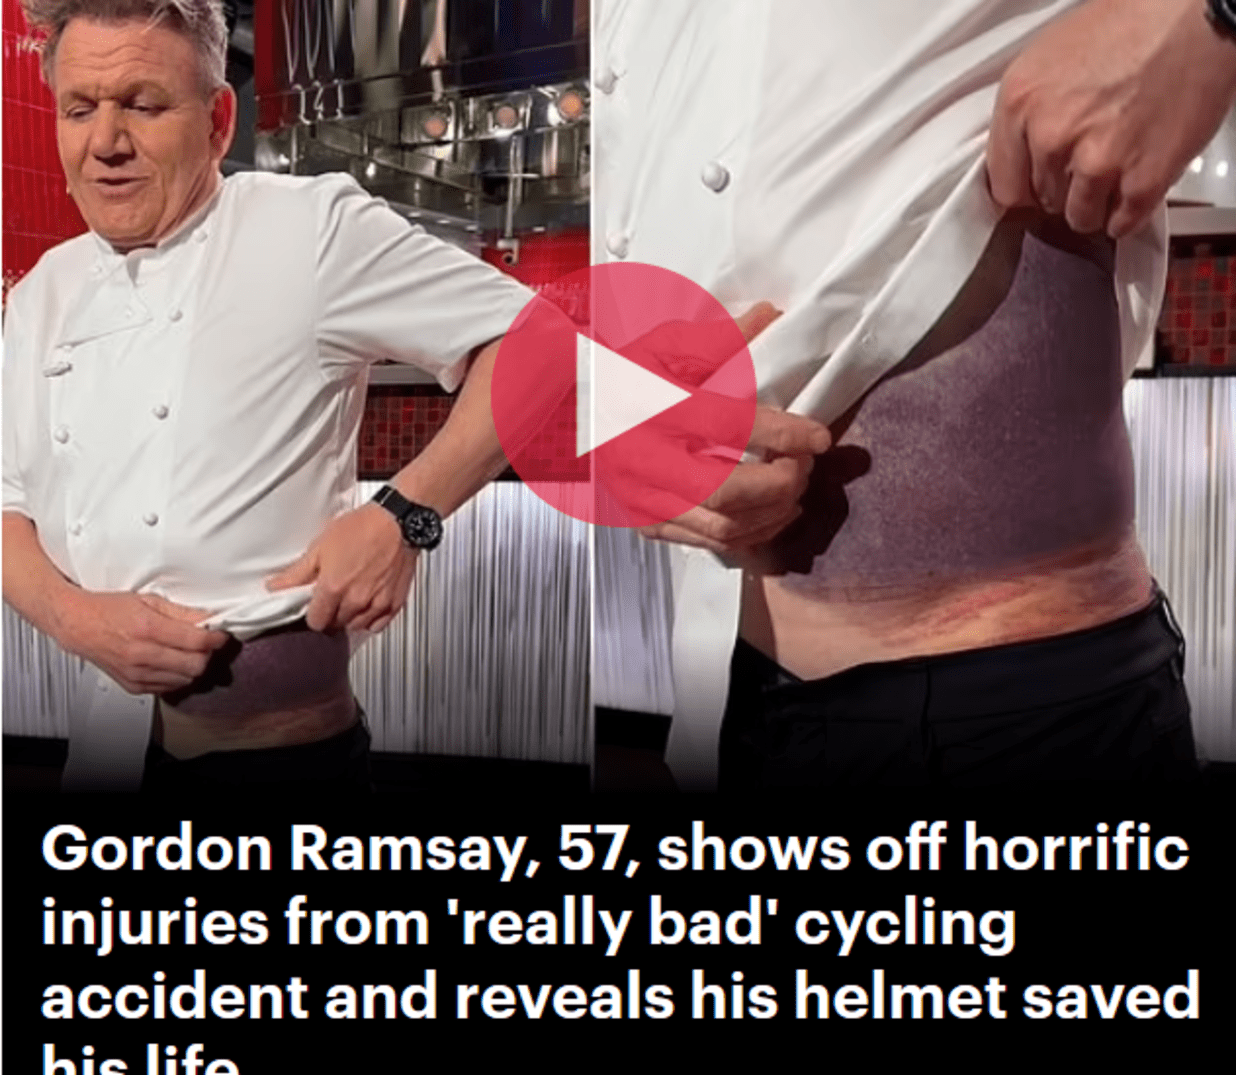 Gordon Ramsay’s Cycling Mishap: A Reminder on Helmet Safety